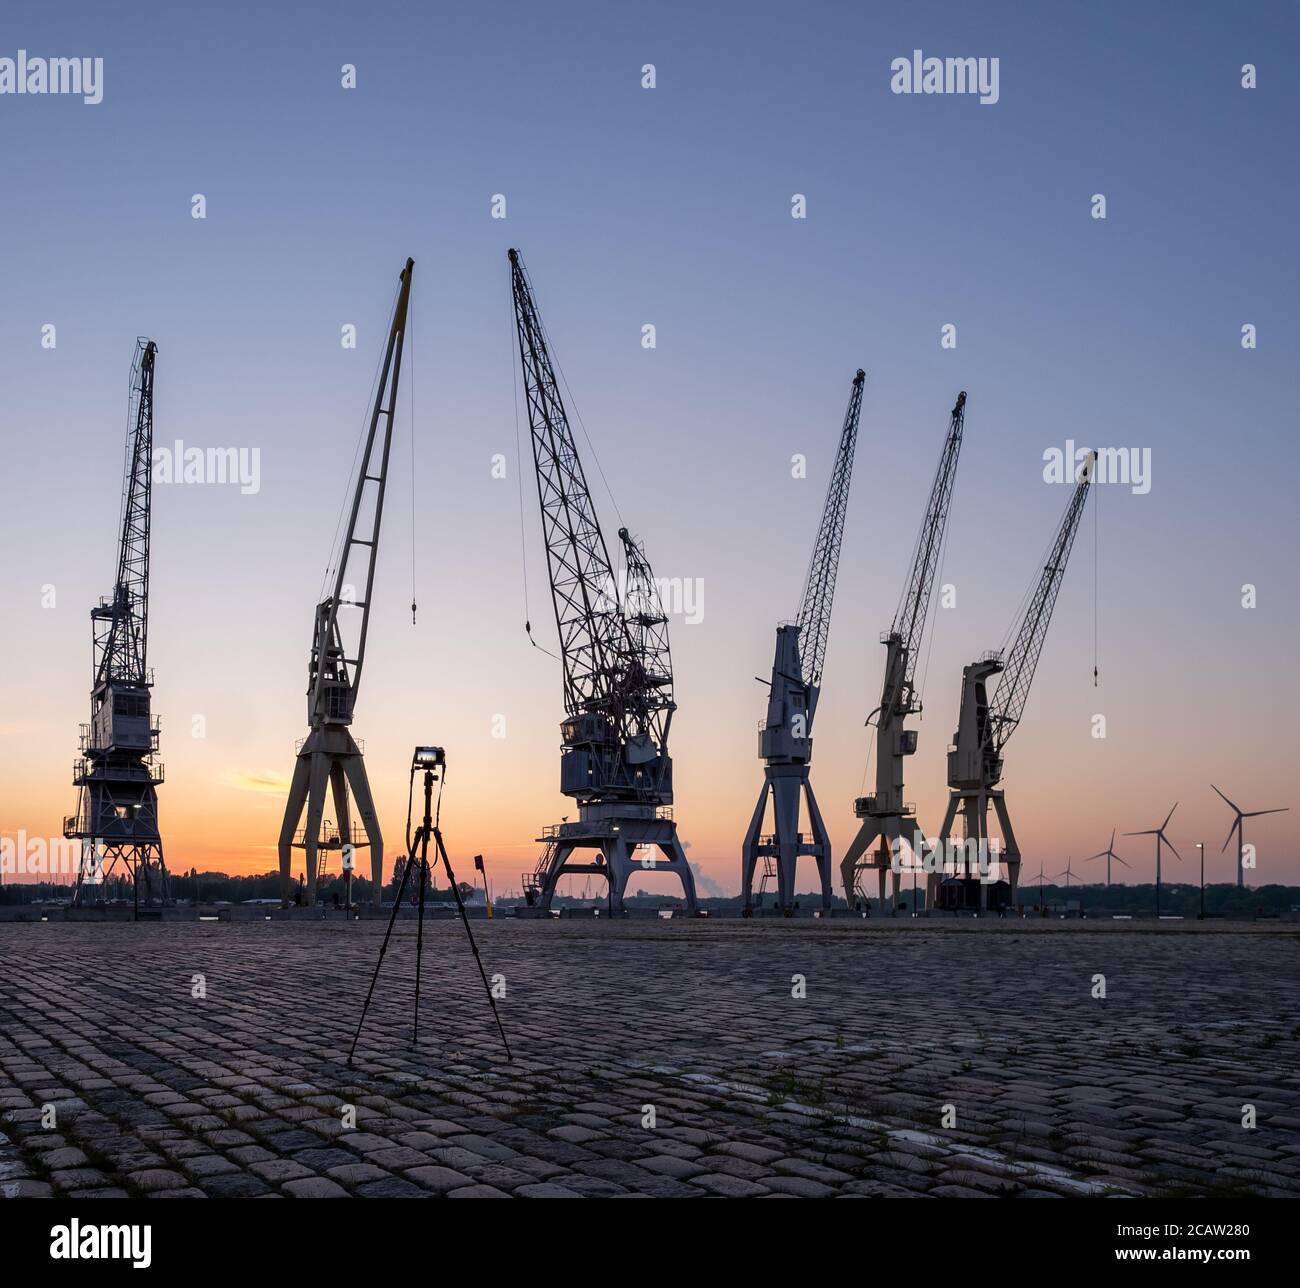 Line-up of historical cranes in the old part of the port of Antwerp with camera on tripod. Stock Photo